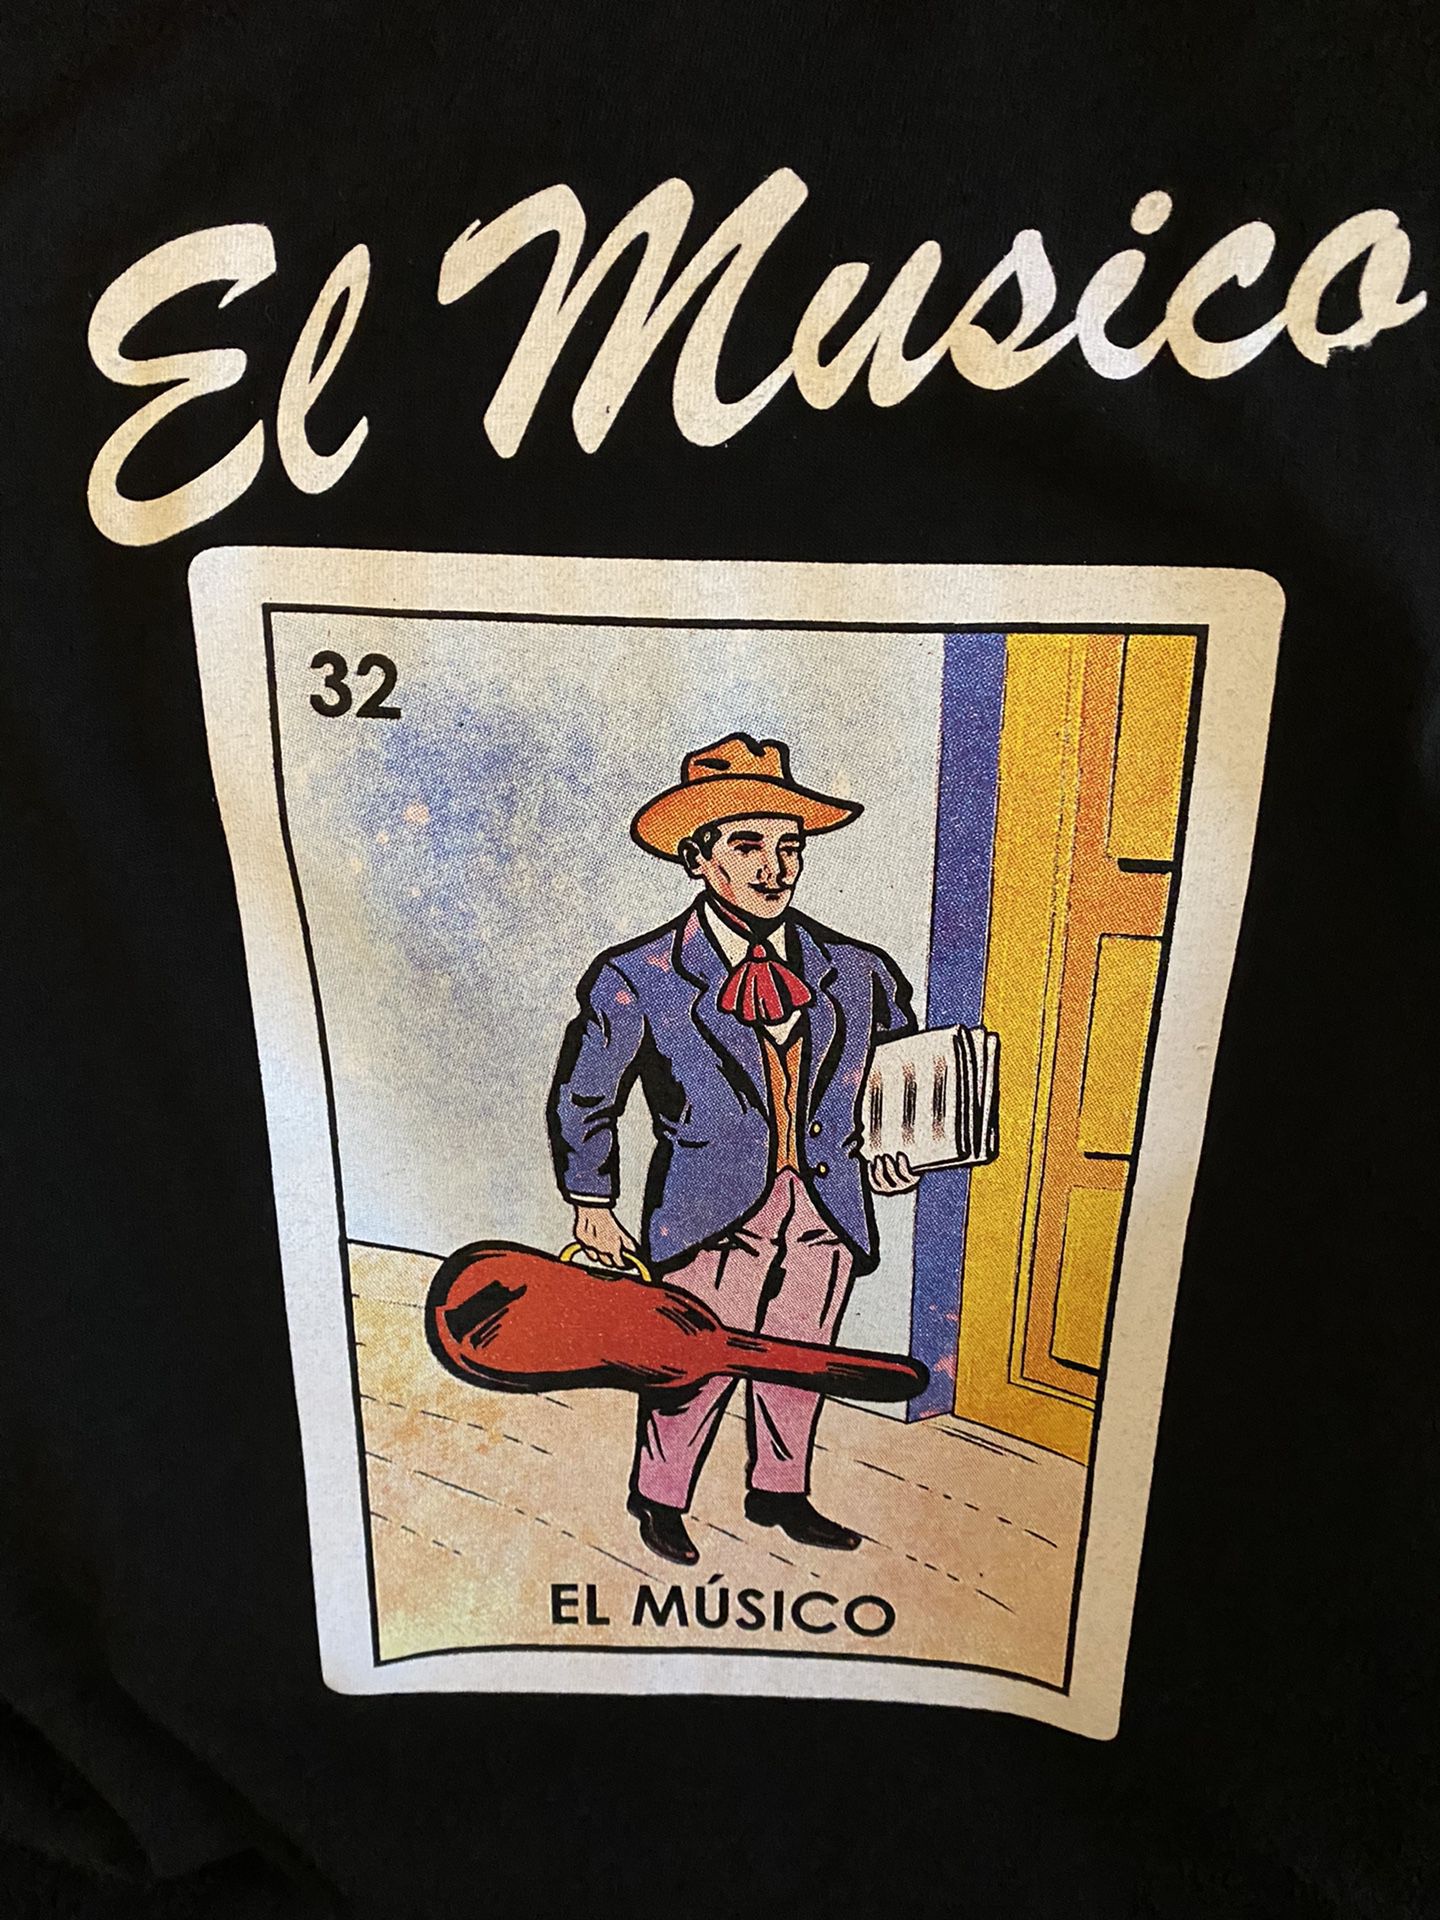 Loteria t-shirts $10 each and hats $6 / Little pocket change with keychain $3 /The other ones are $2 dollars each